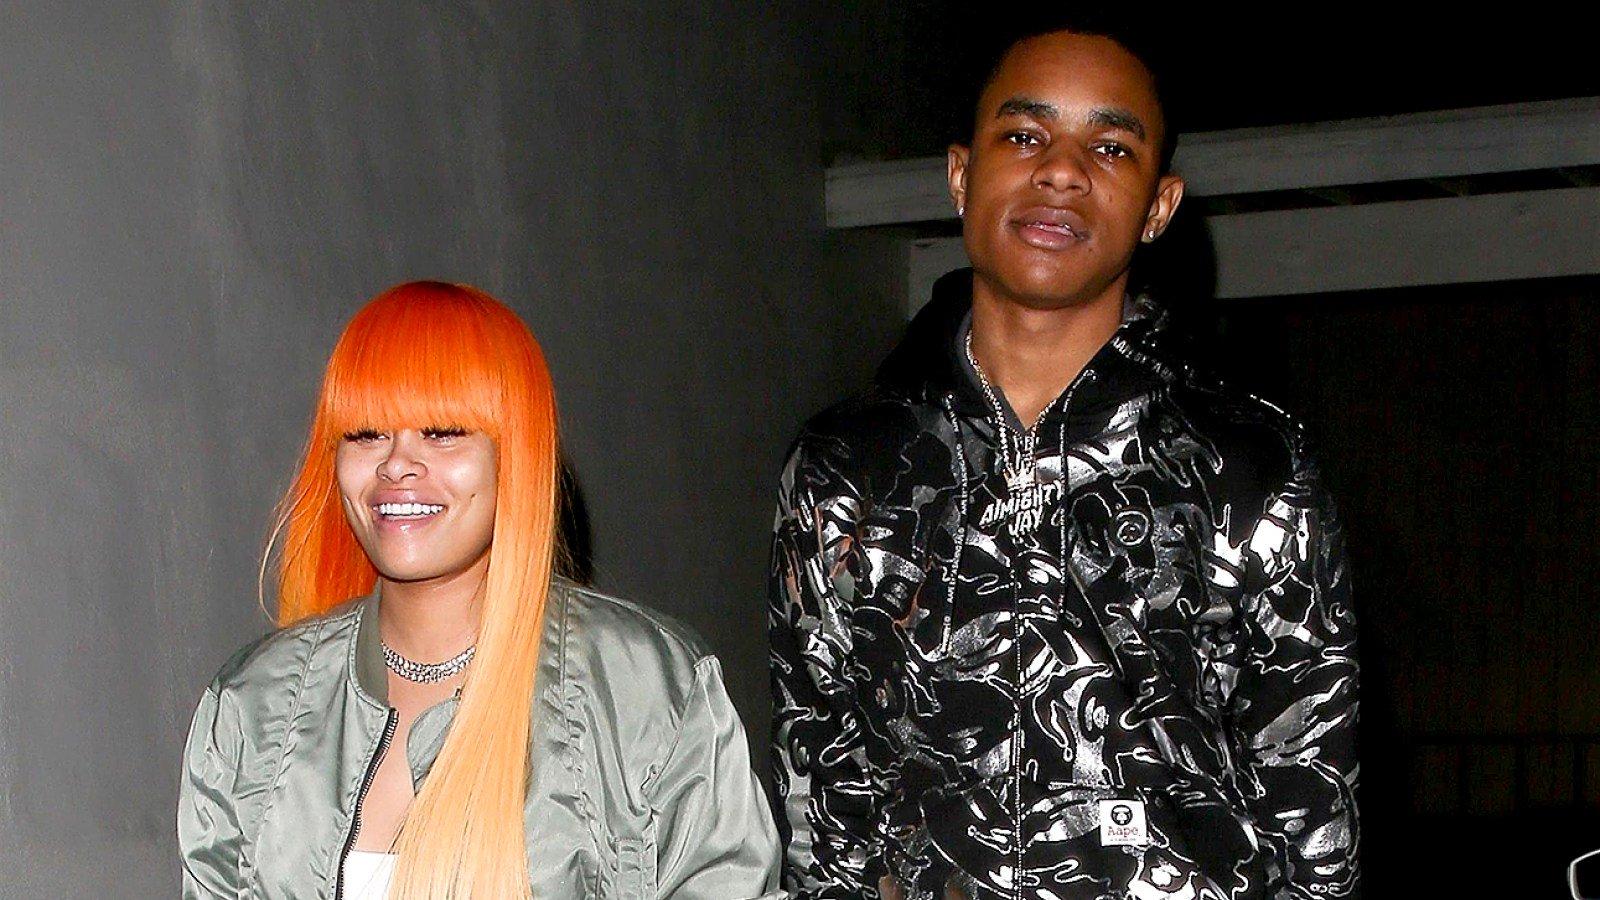 WATCH Blac Chyna's Ex BF YBN Almighty Jay Beaten And Robbed In NYC